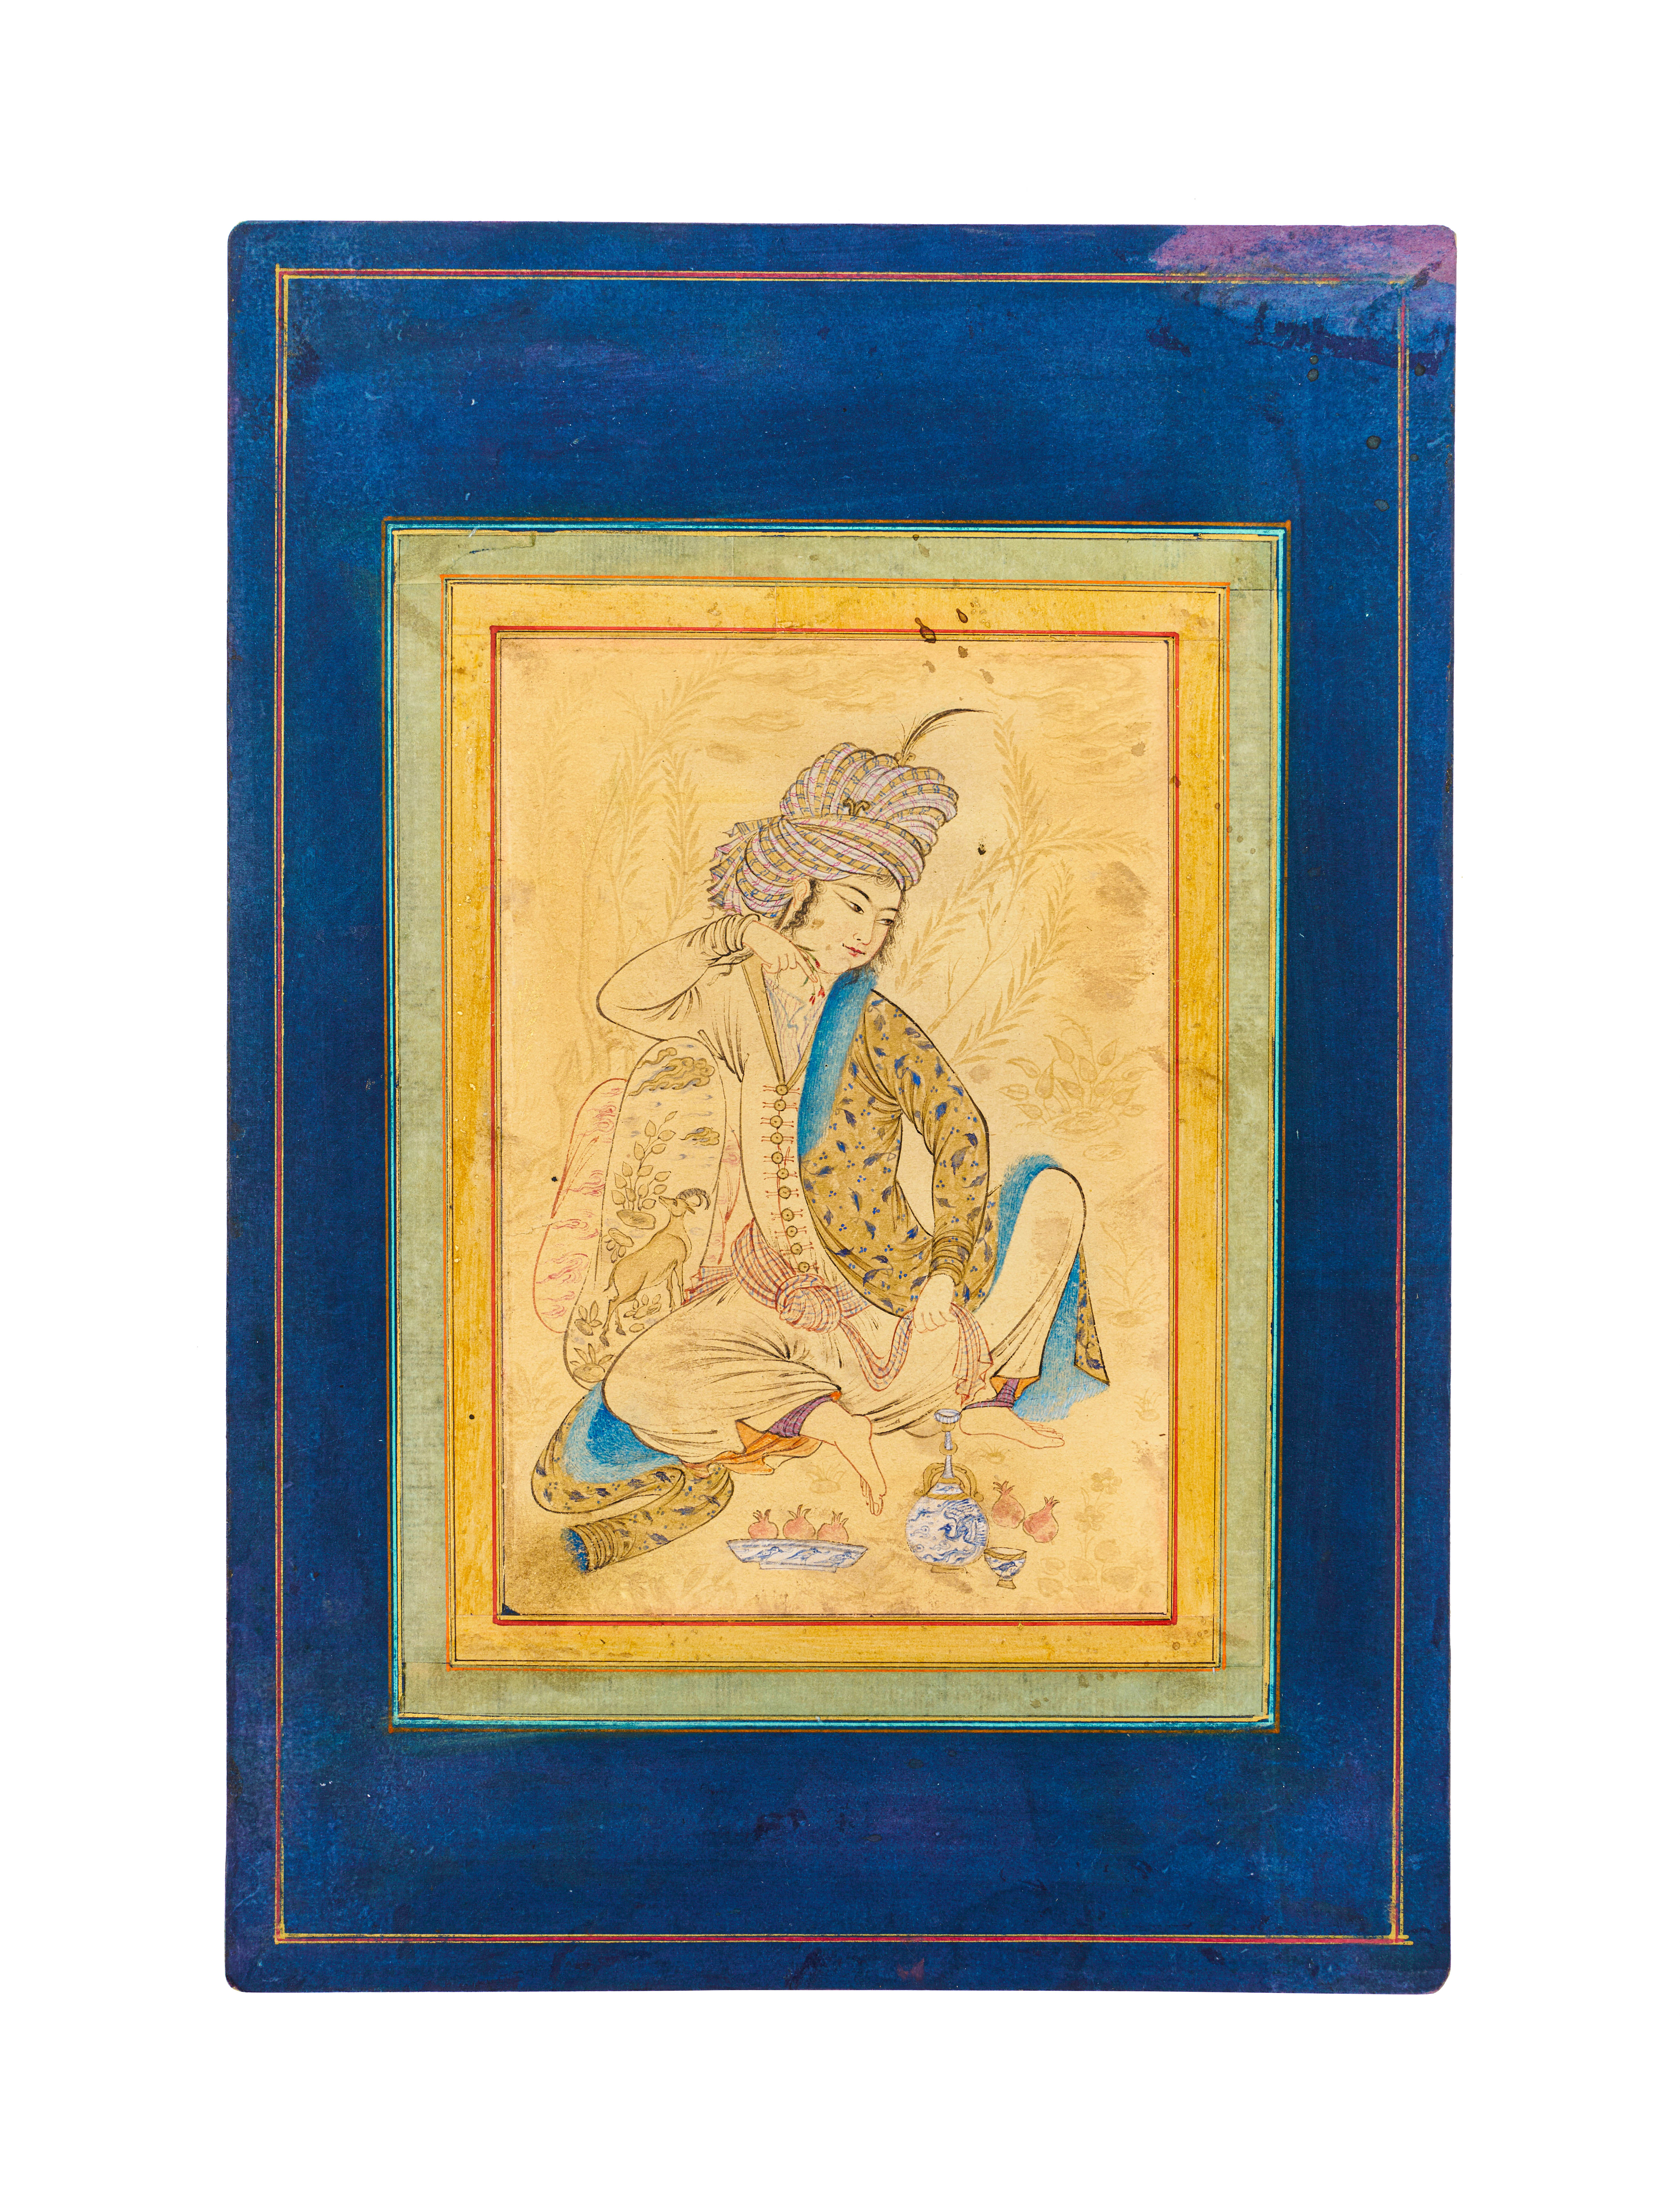 A SEATED YOUTH WITH A WINE CUP, PERSIA, QAJAR, SAFAVID STYLE, SECOND HALF 19TH CENTURY